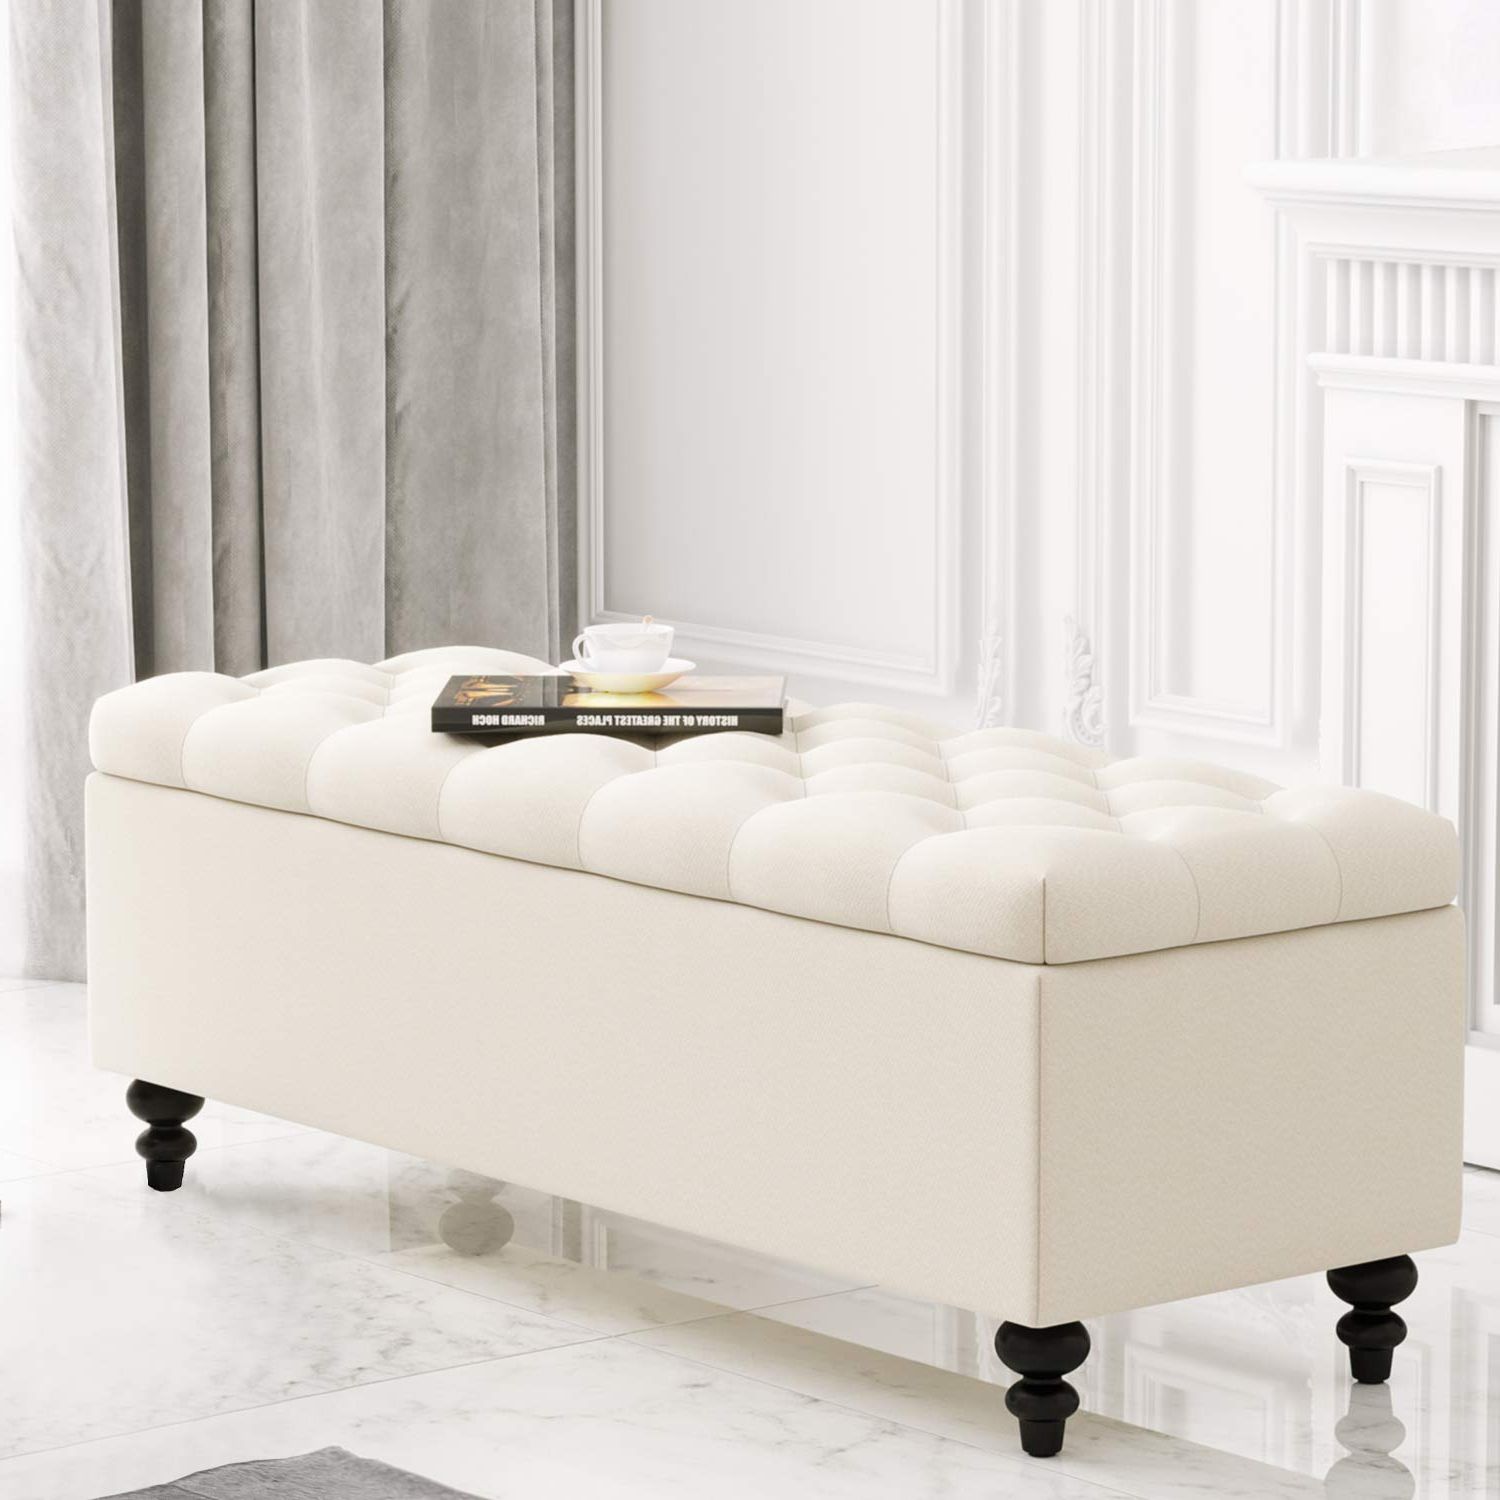 Most Recently Released Amazon: Huimo Ottoman With Storage, 51 Inch Storage Ottoman Bench With  Button Tufted, Bedroom Bench Safety Hinge Ottoman In Upholstered Fabrics,  Large Storage Bench For Bedroom, Living Room (ivory) : Home & Kitchen Inside Fabric Upholstered Ottomans (View 8 of 10)